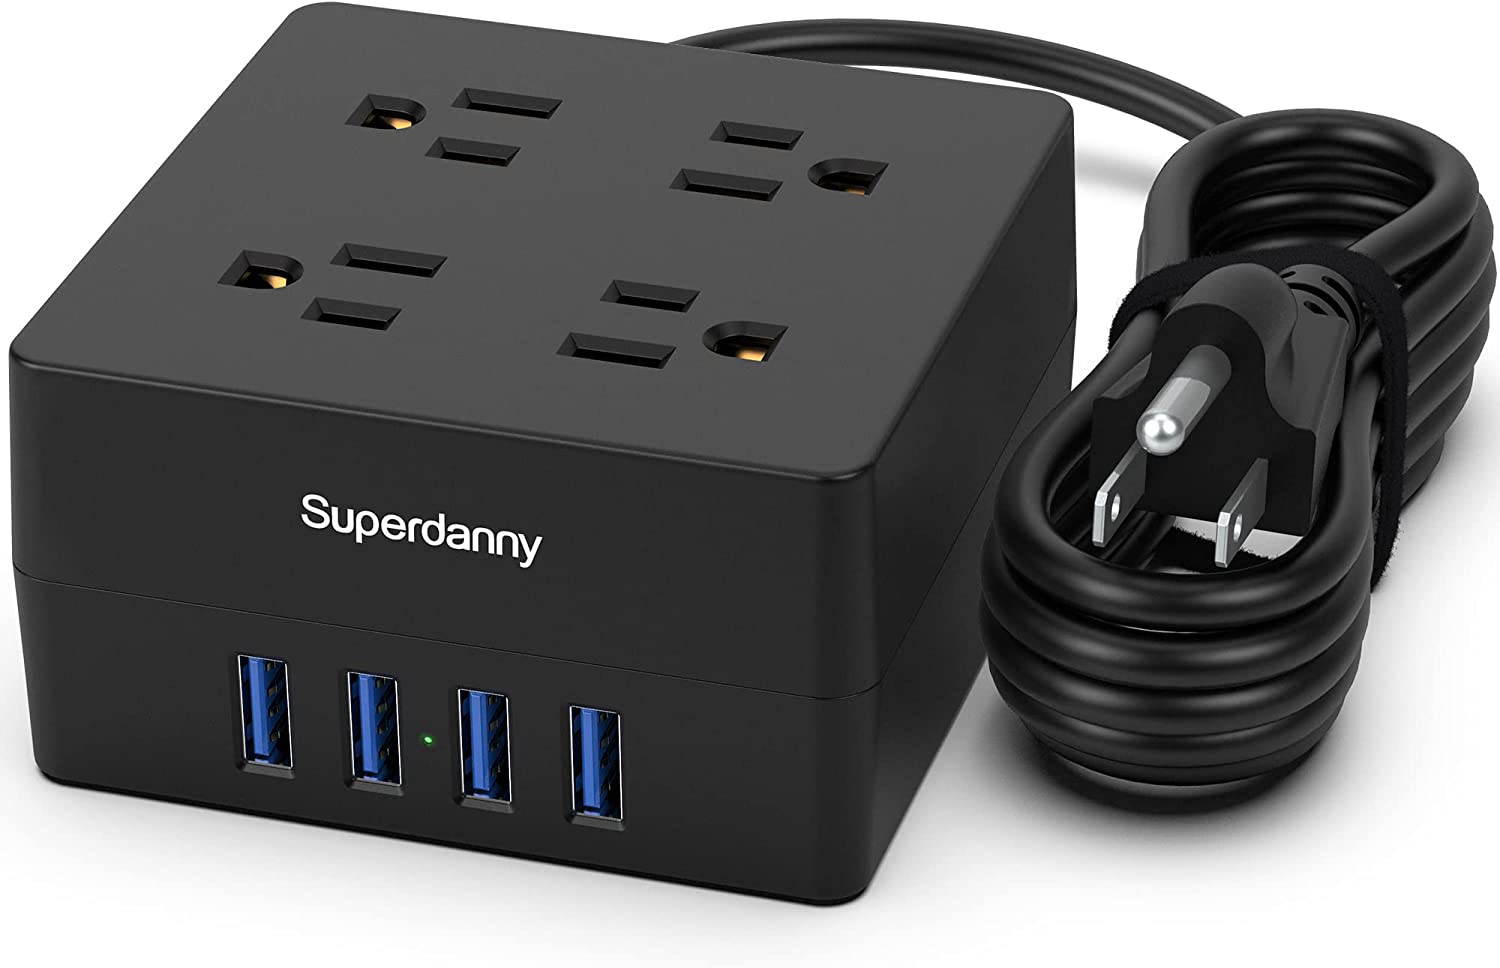 8 in 1 Universal Power Outlet (5 Ft Cord - Black)